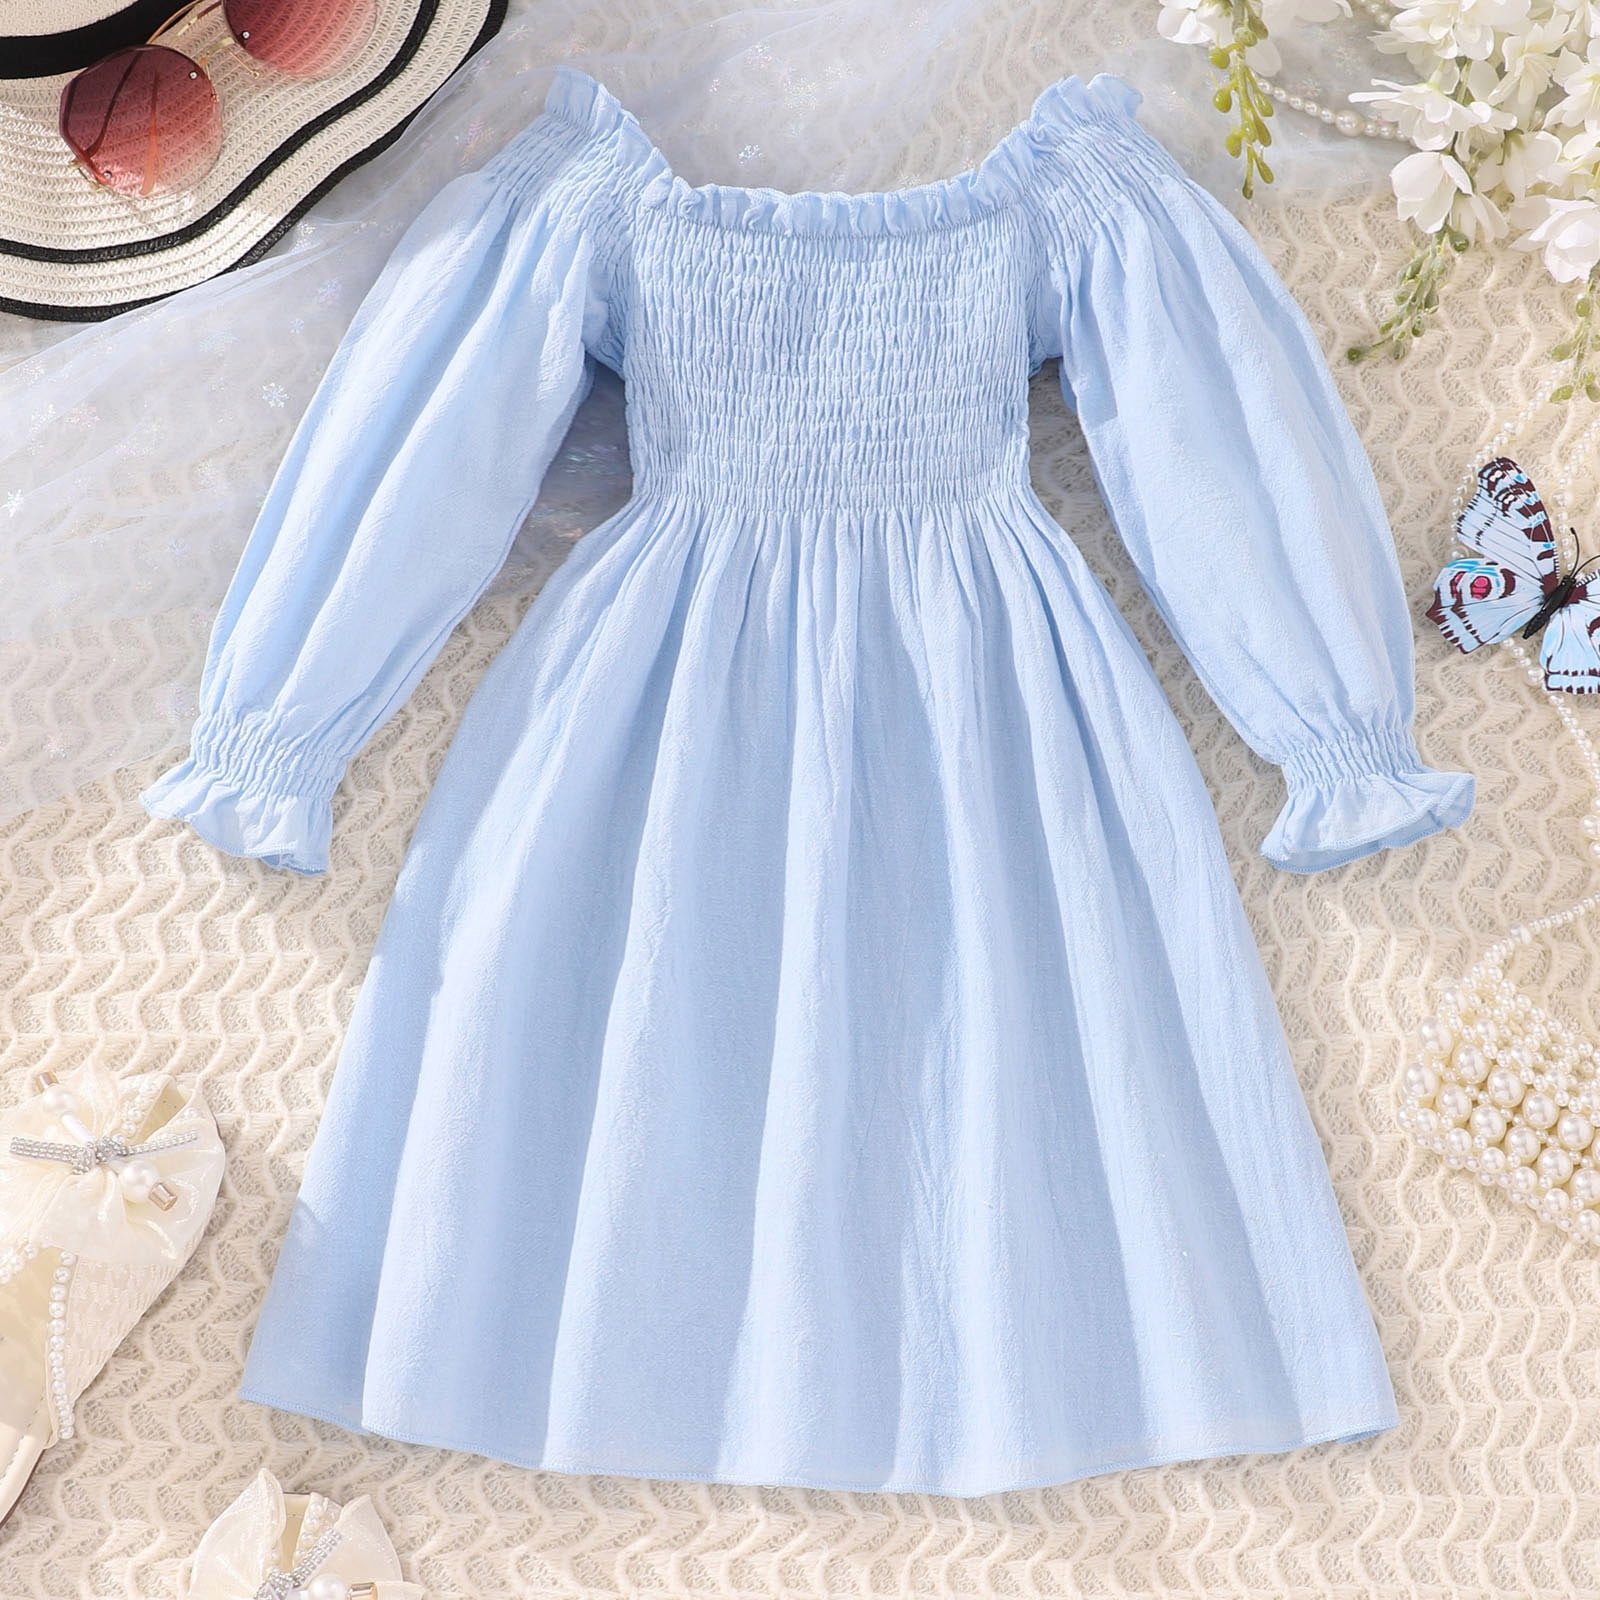 adviicd 2t Dresses for Girls Cotton Party Wedding Dress Princess Tulle Tutu  Gown Lace Girl First Birthday Girl Outfit - Walmart.com